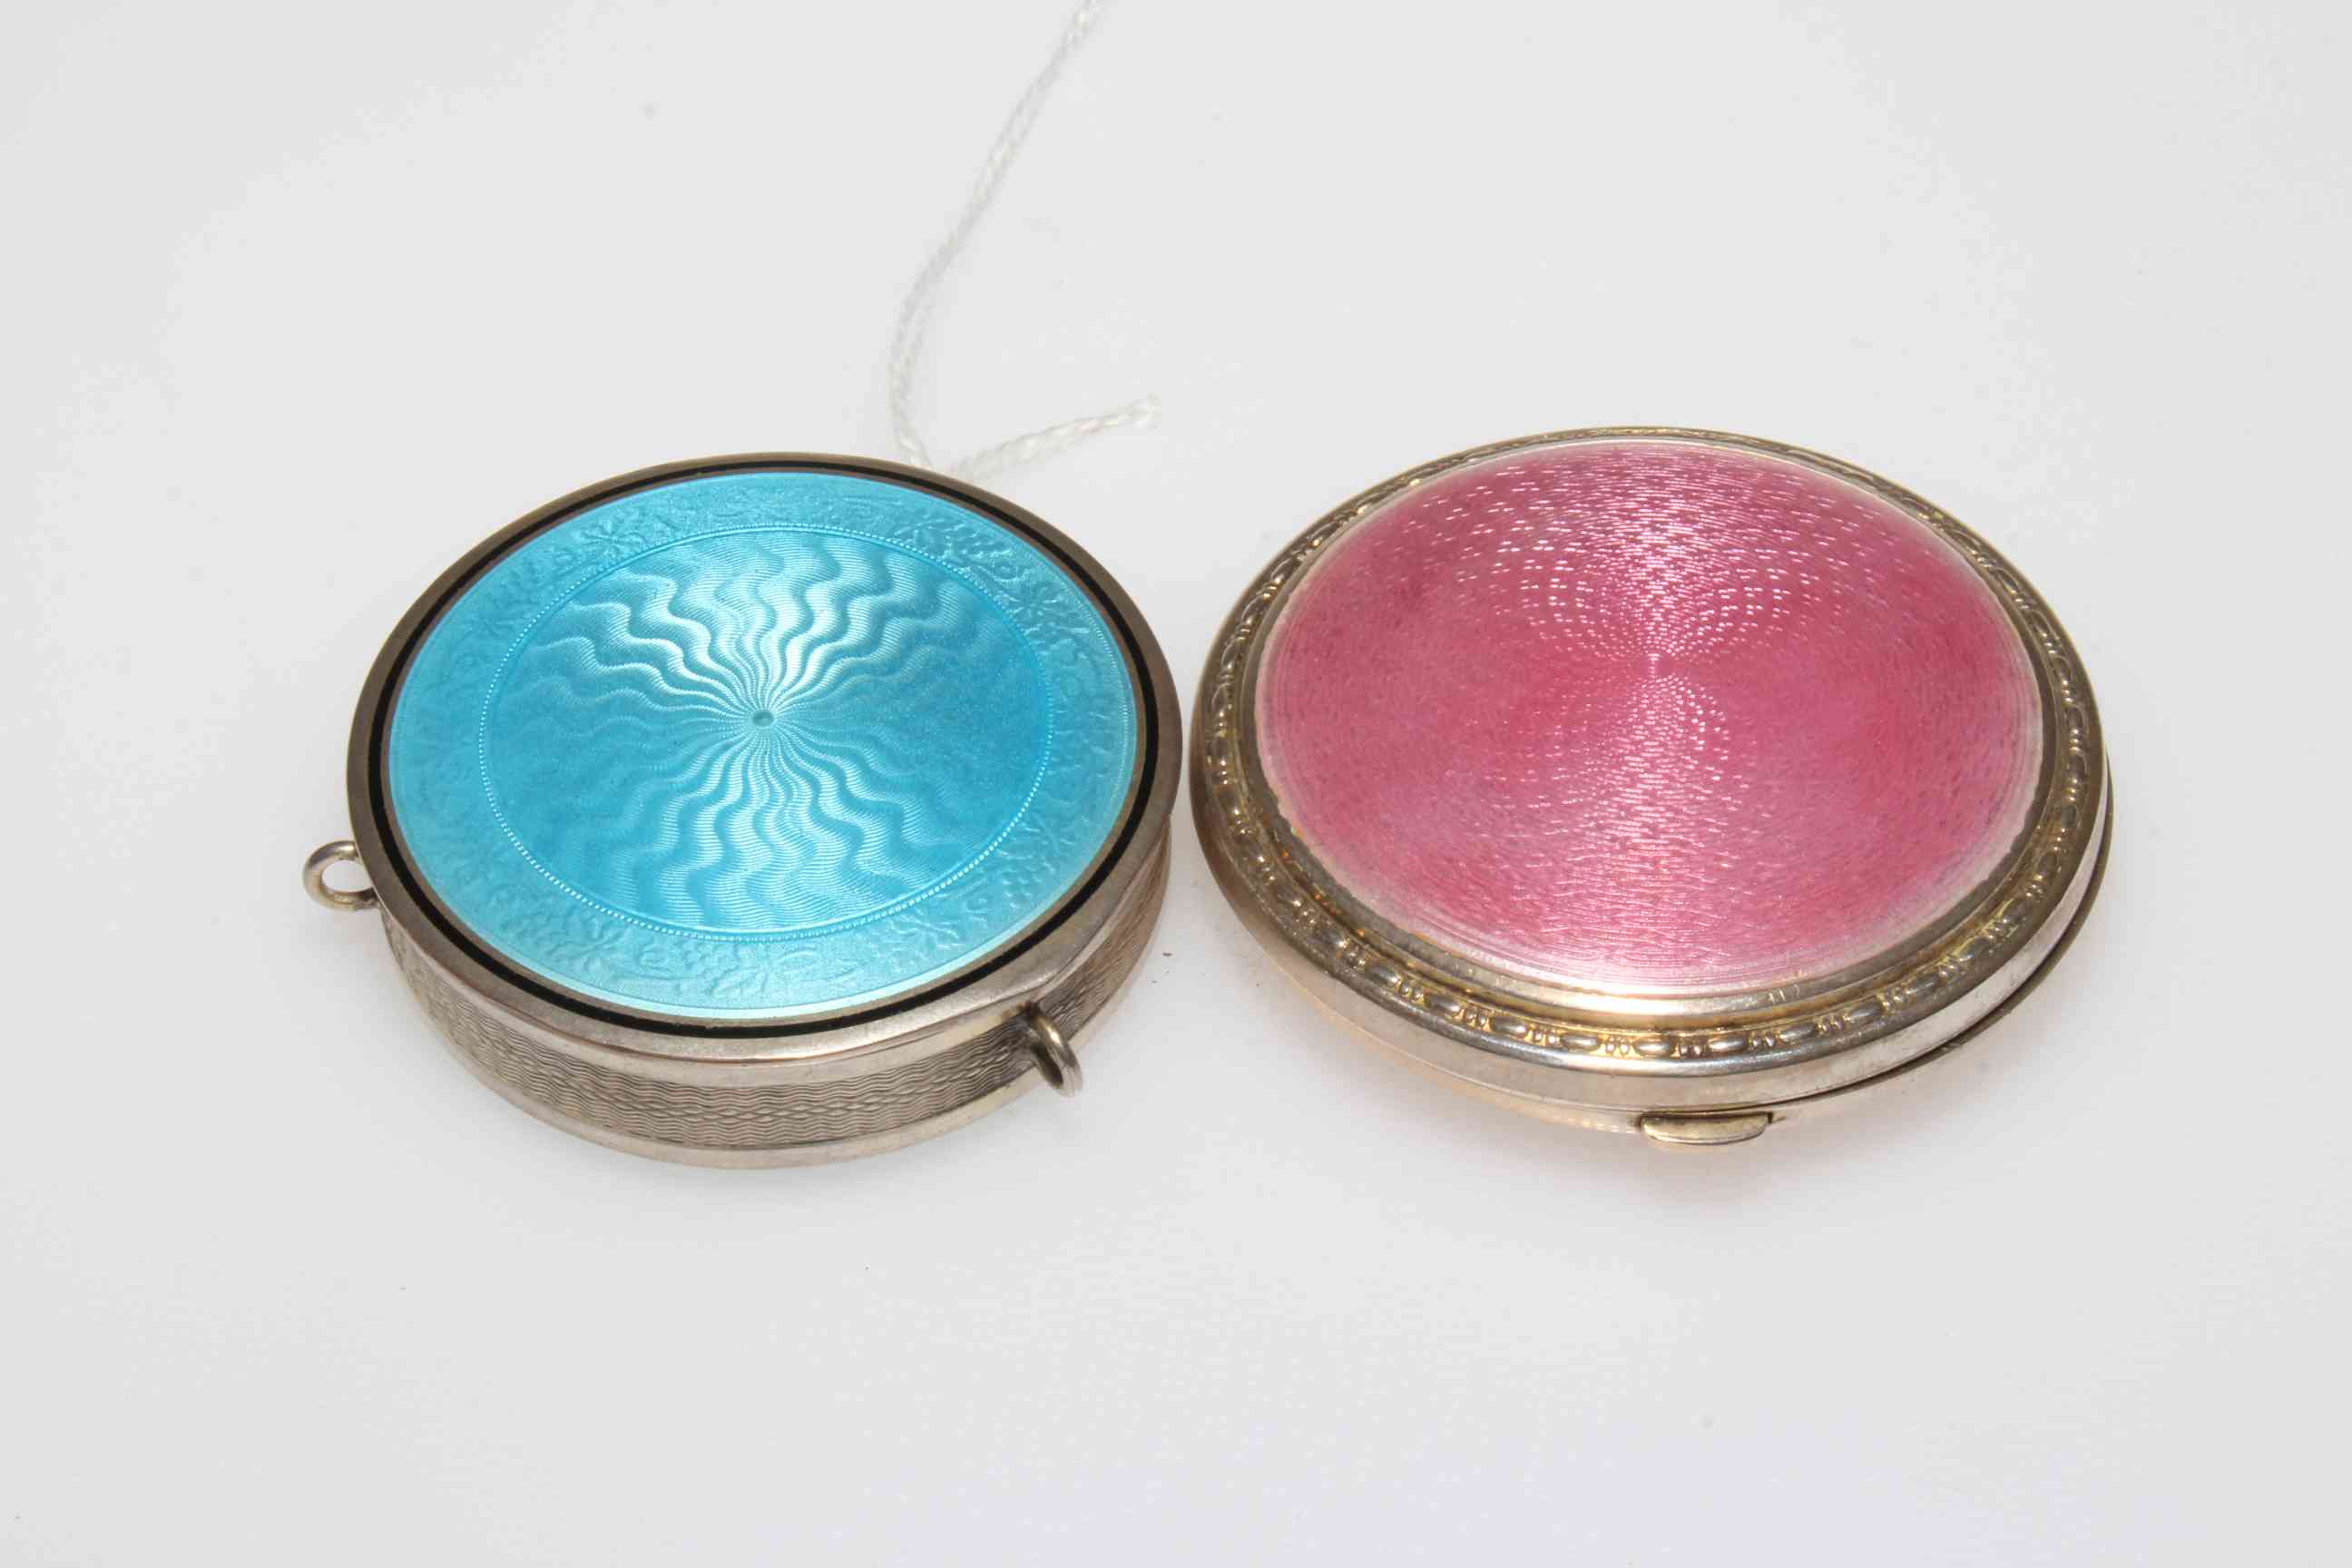 Silver and pink enamel compact with ornate border, Birmingham 1929, 5.